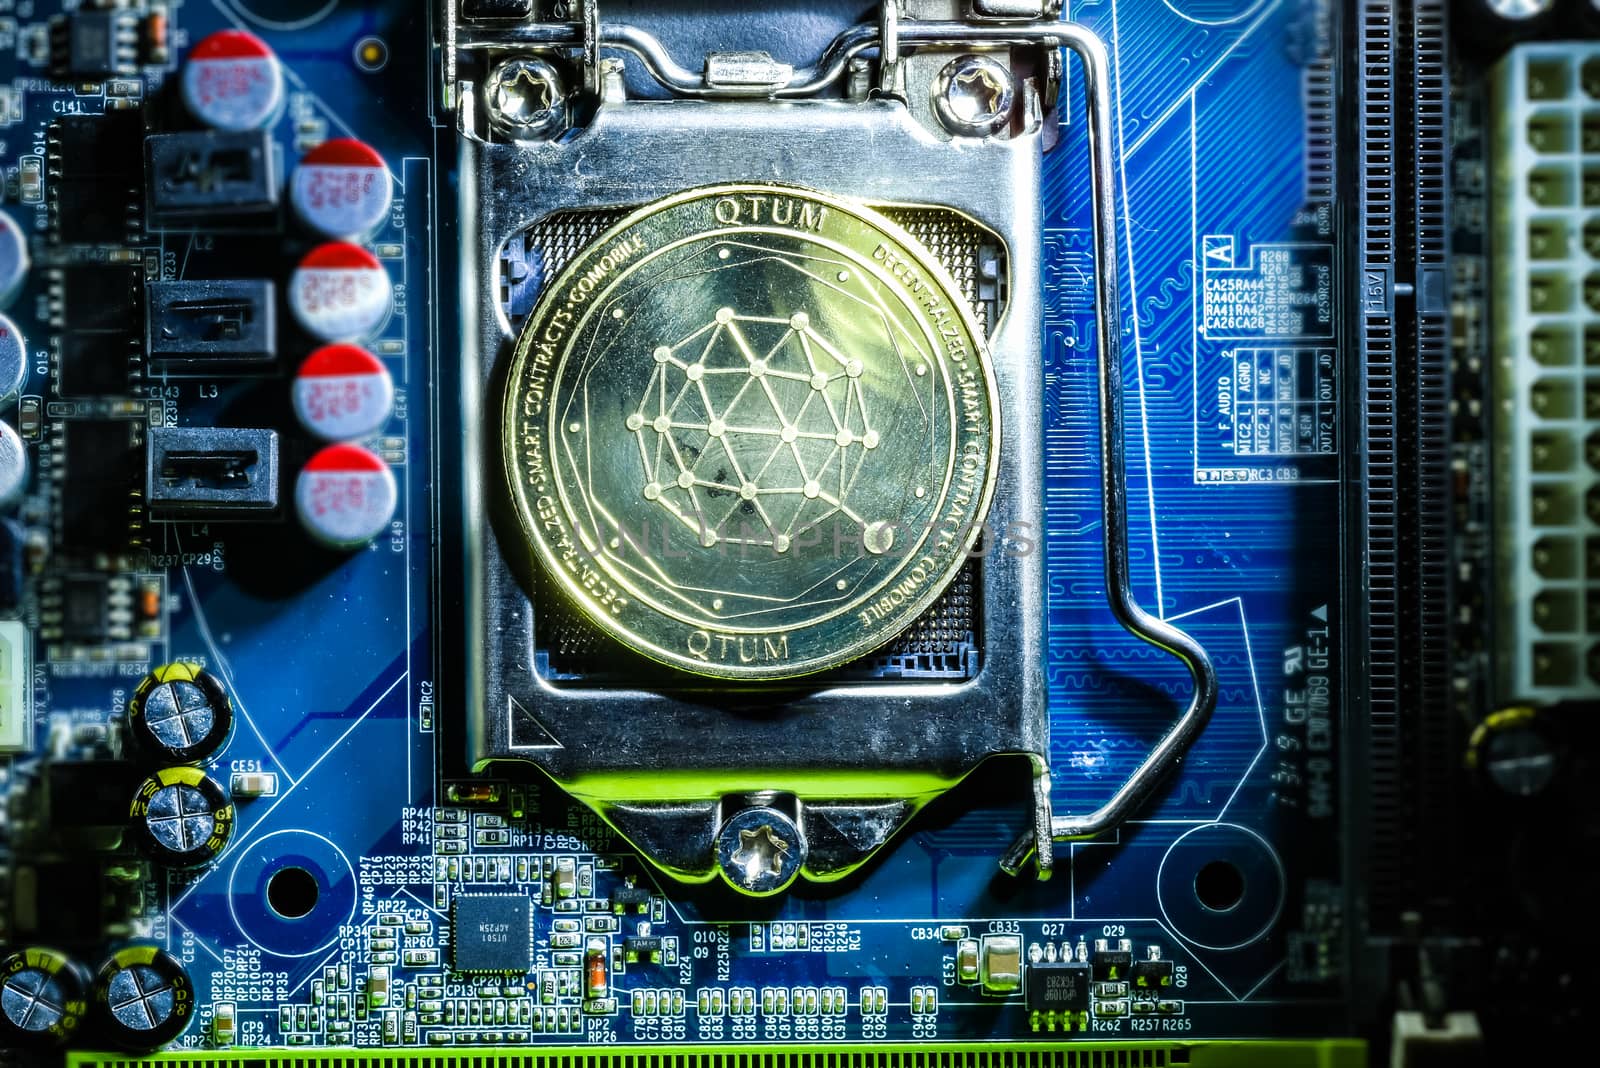 Top view of golden qtum cryptocurrency physical coin on computer mother board processor.Bitcoin mining farm, working computer equipment concept.